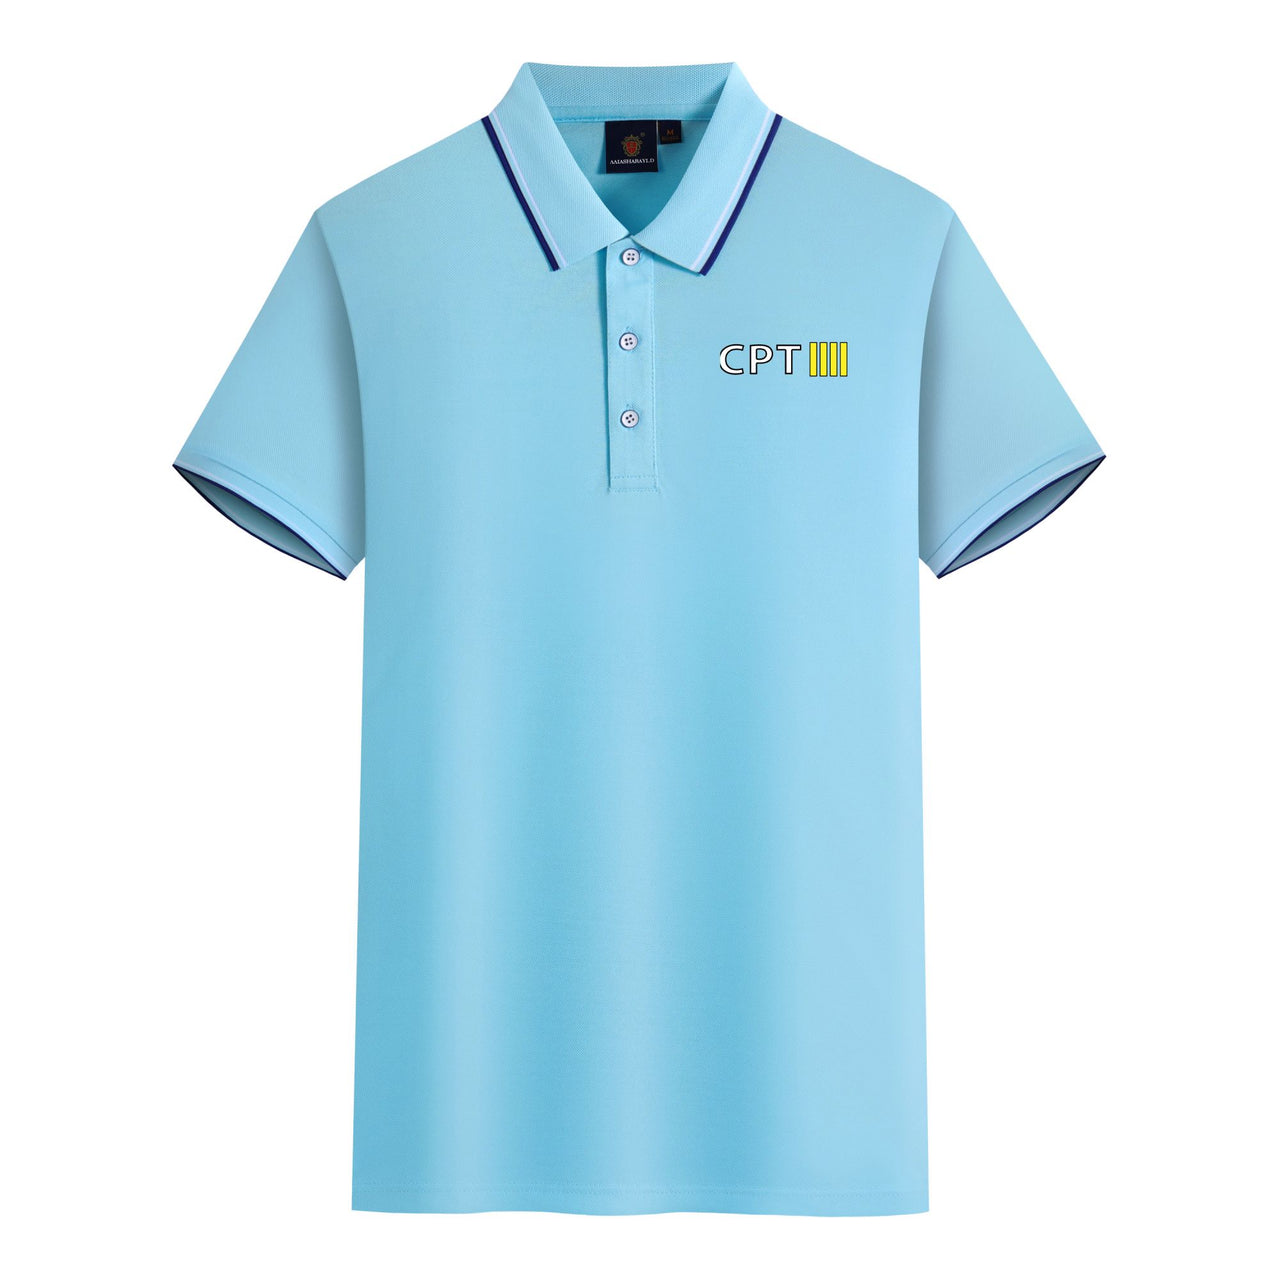 CPT & 4 Lines Designed Stylish Polo T-Shirts